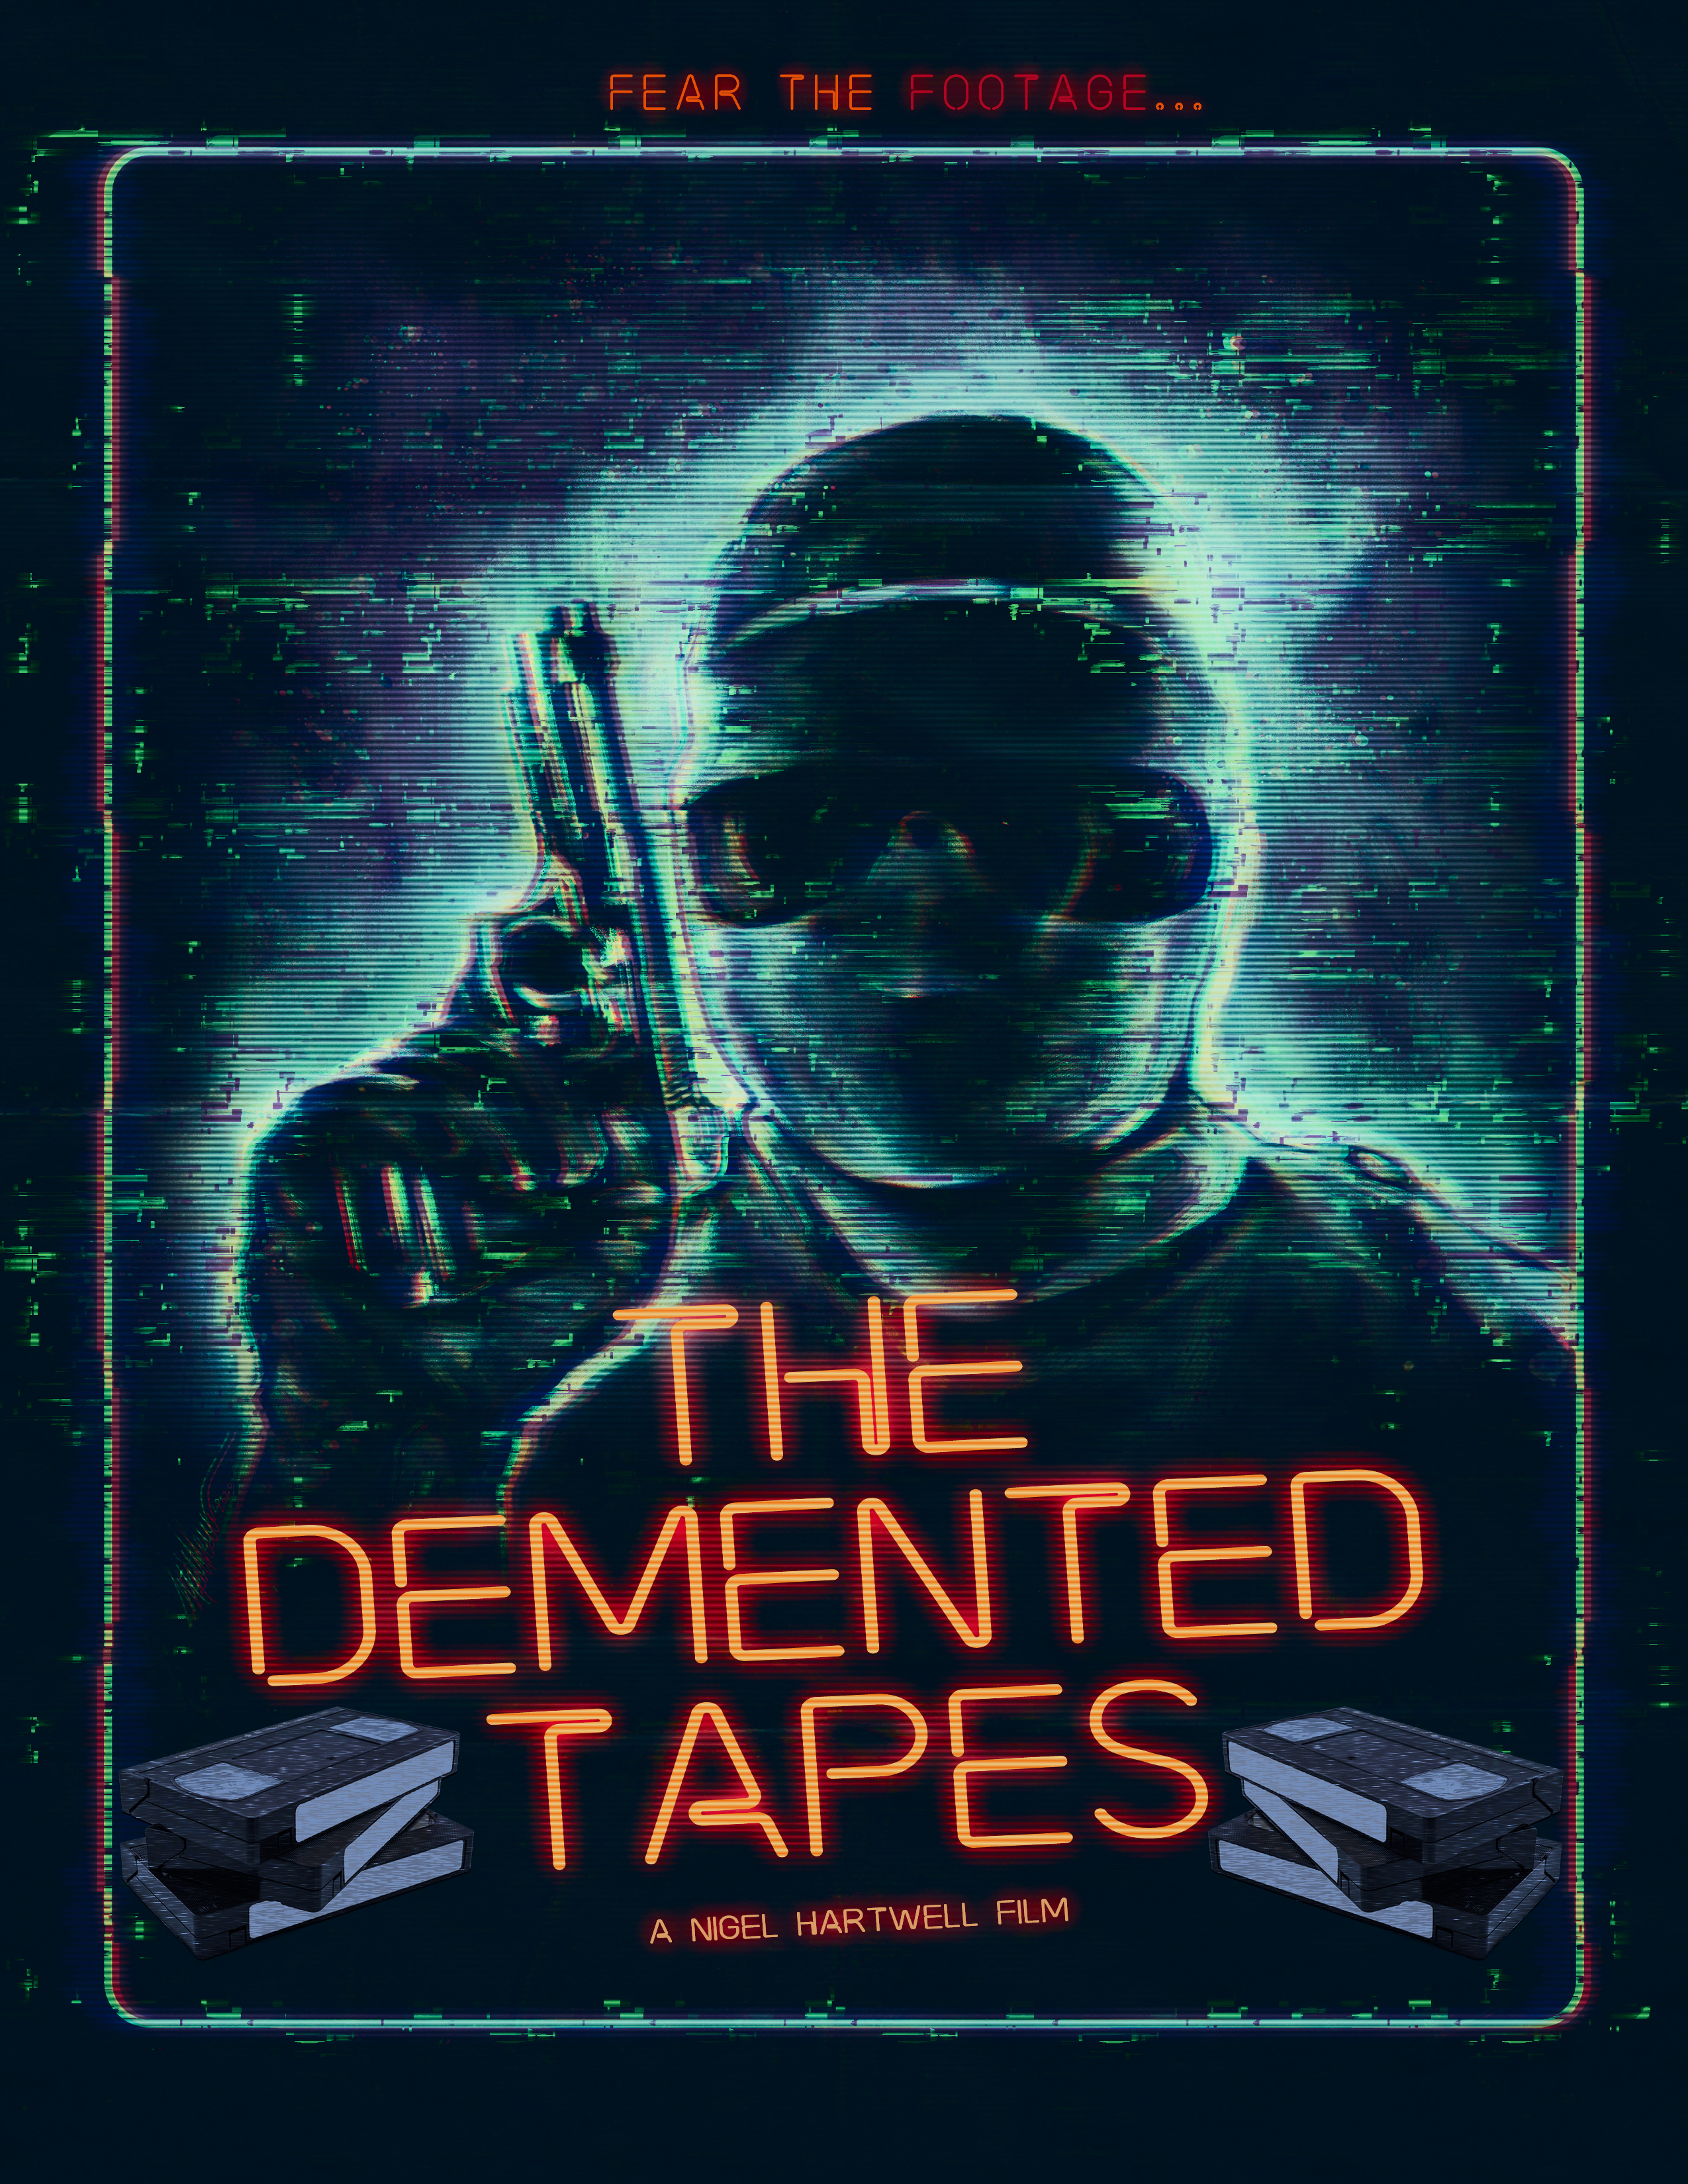 DEMENTED TAPES